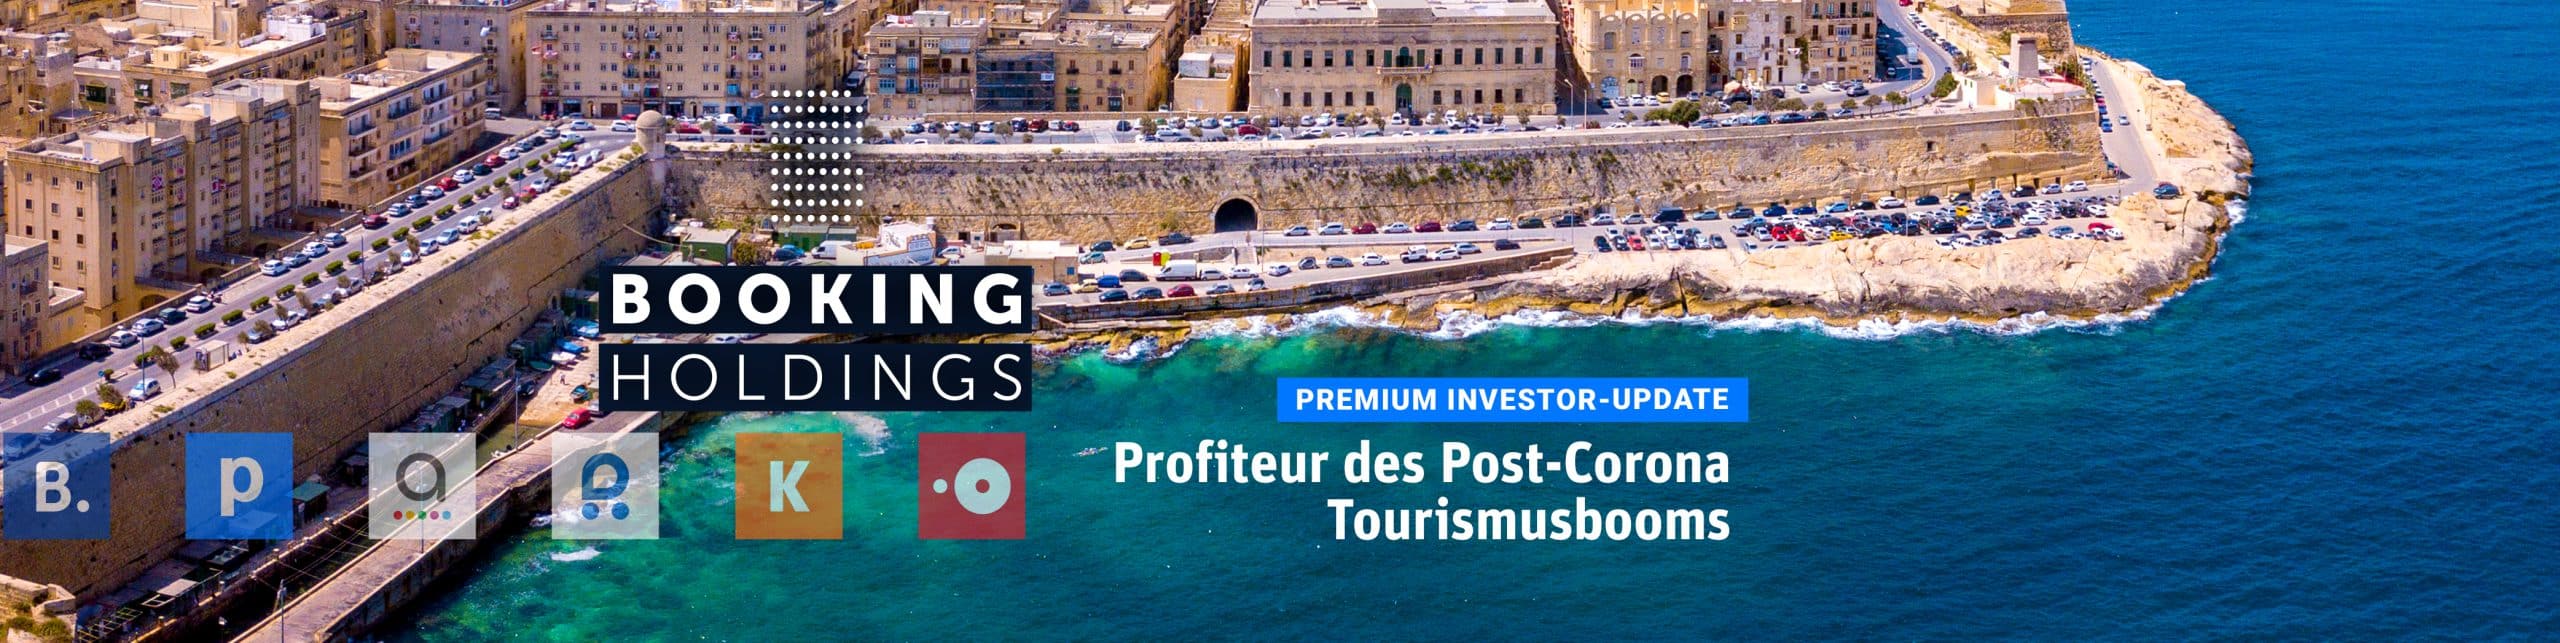 Booking Holdings Investor-Update - Profiteur des Post-Corona Tourismusbooms